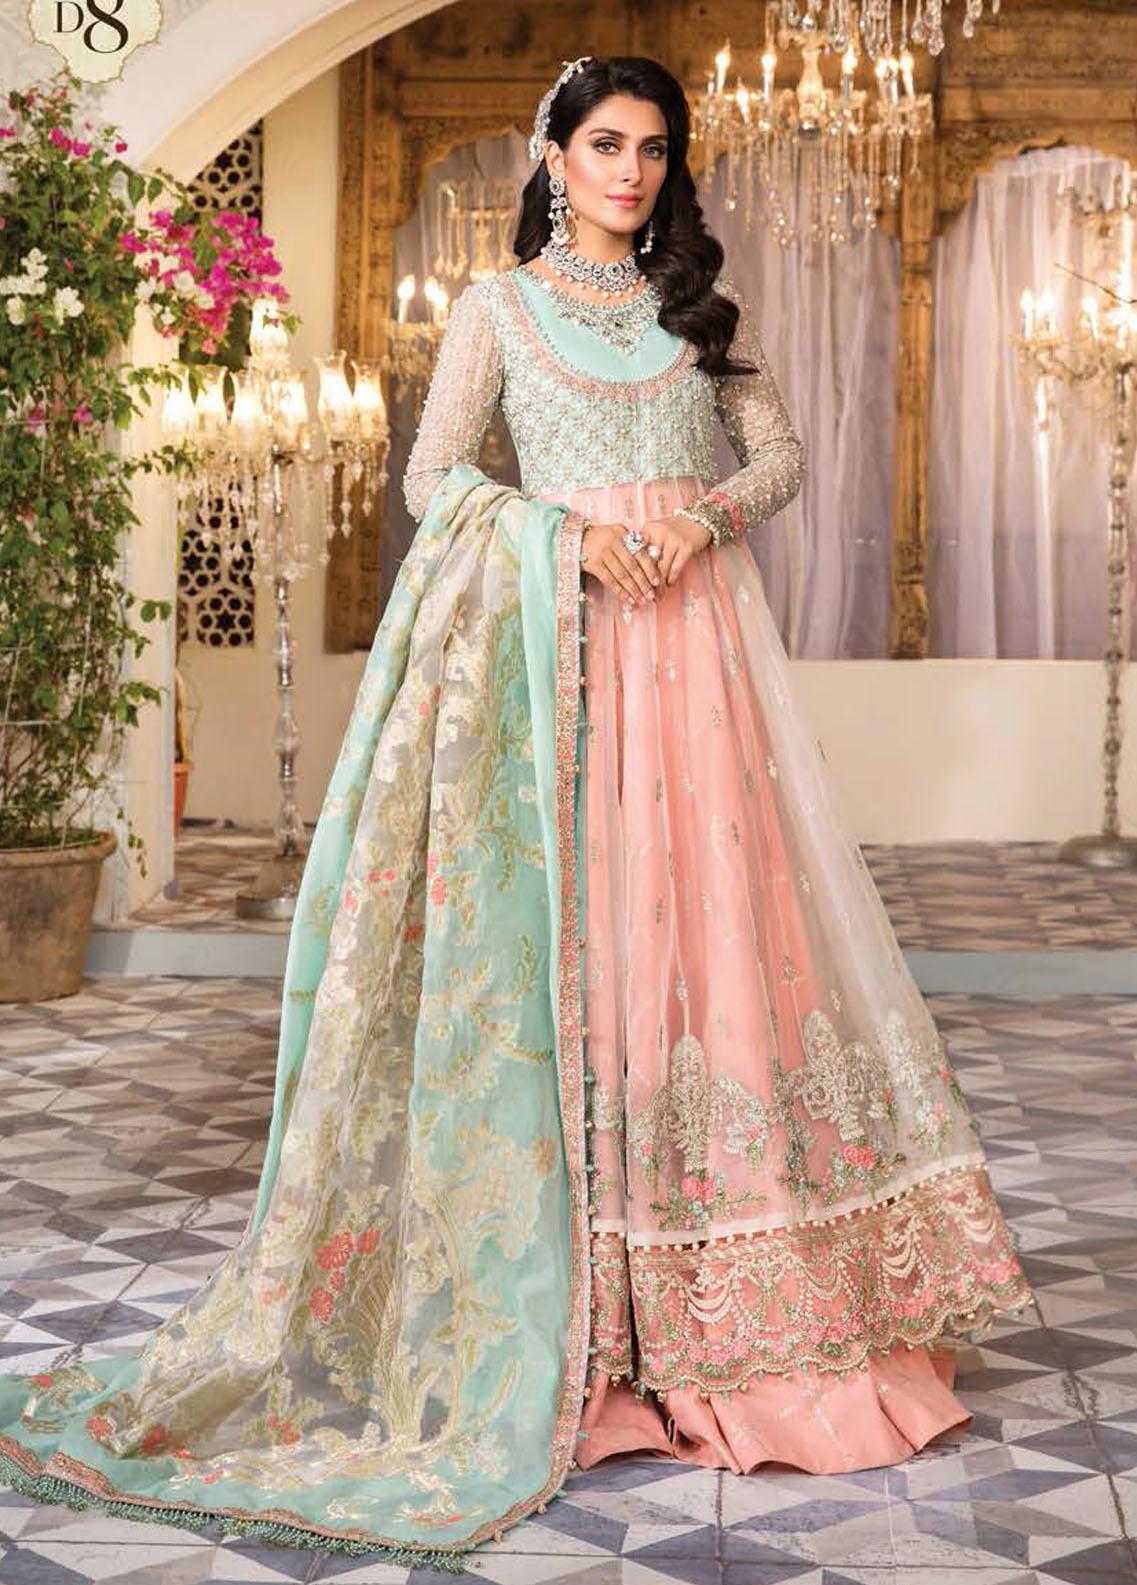 Maria B Embroidered Organza Suits D8 Luxury Collection